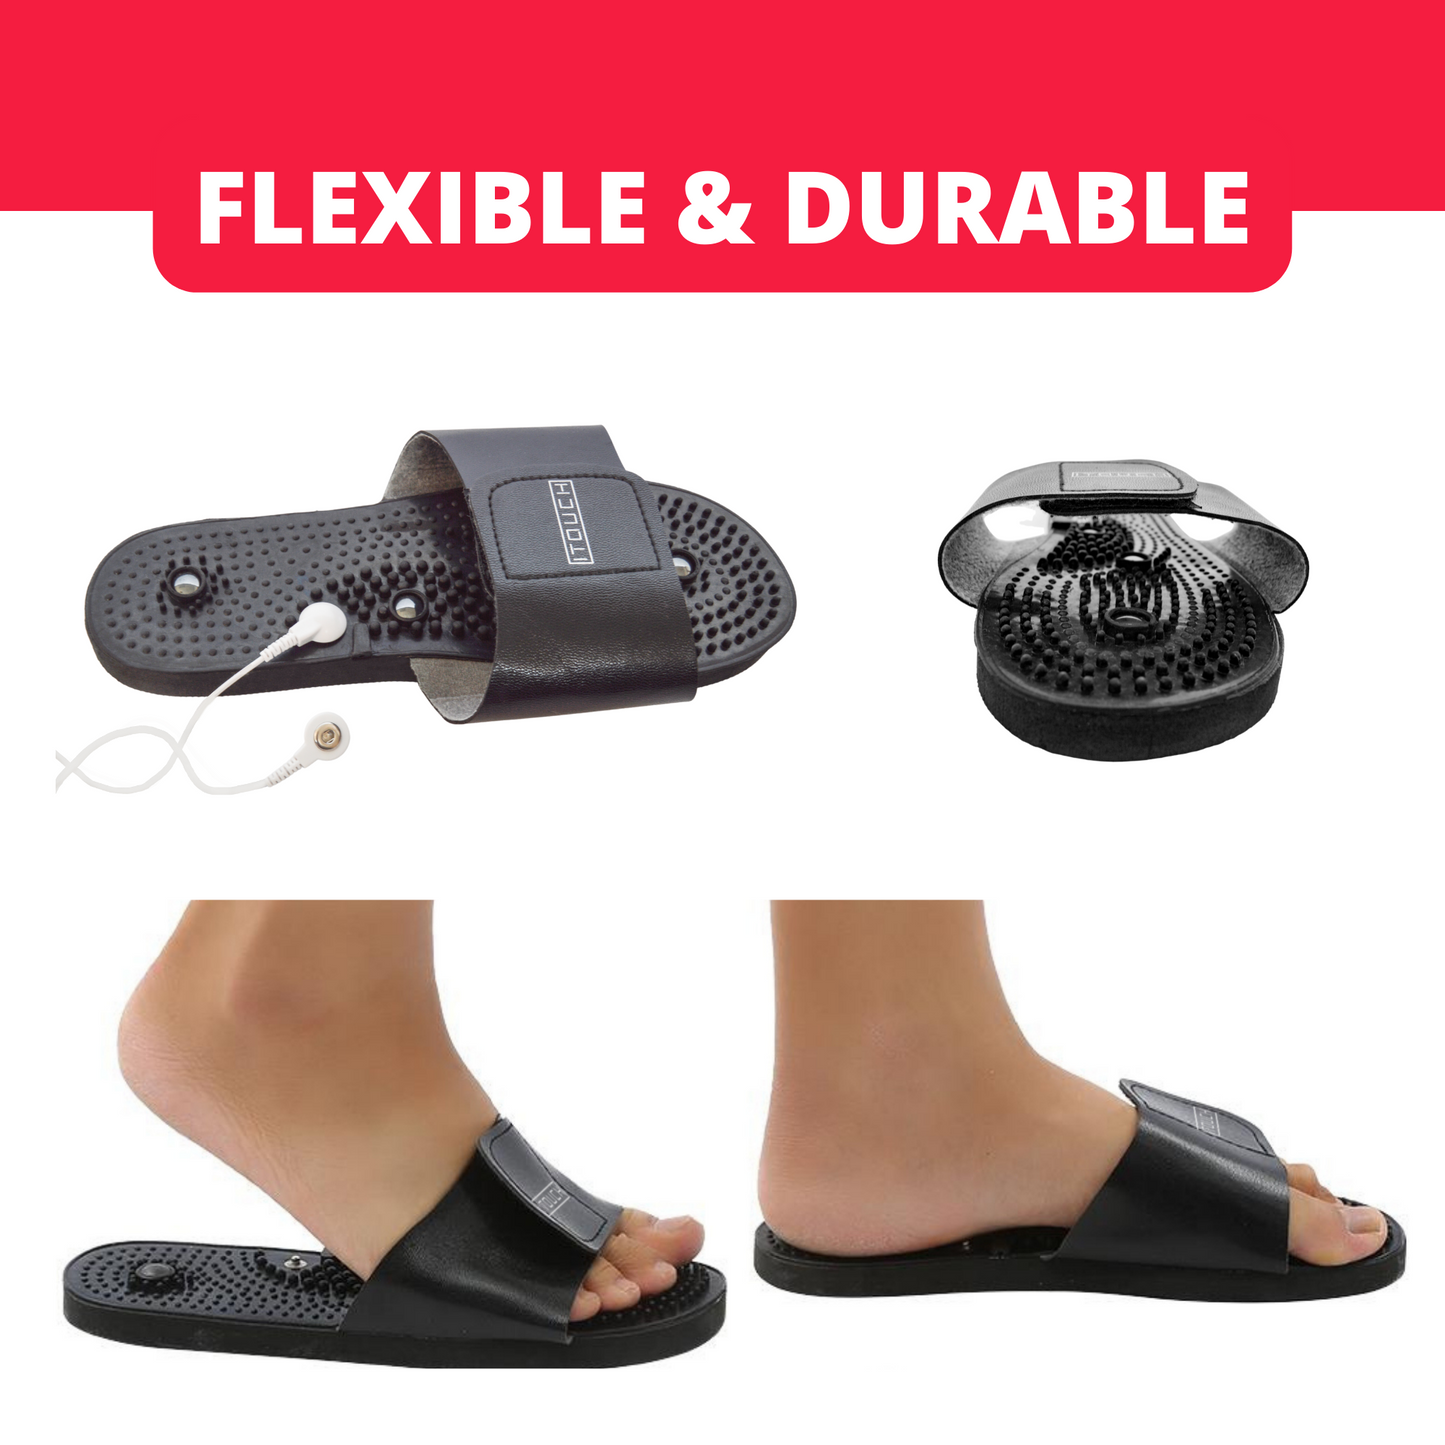 Foot Reflexology Slippers - For TENS Units